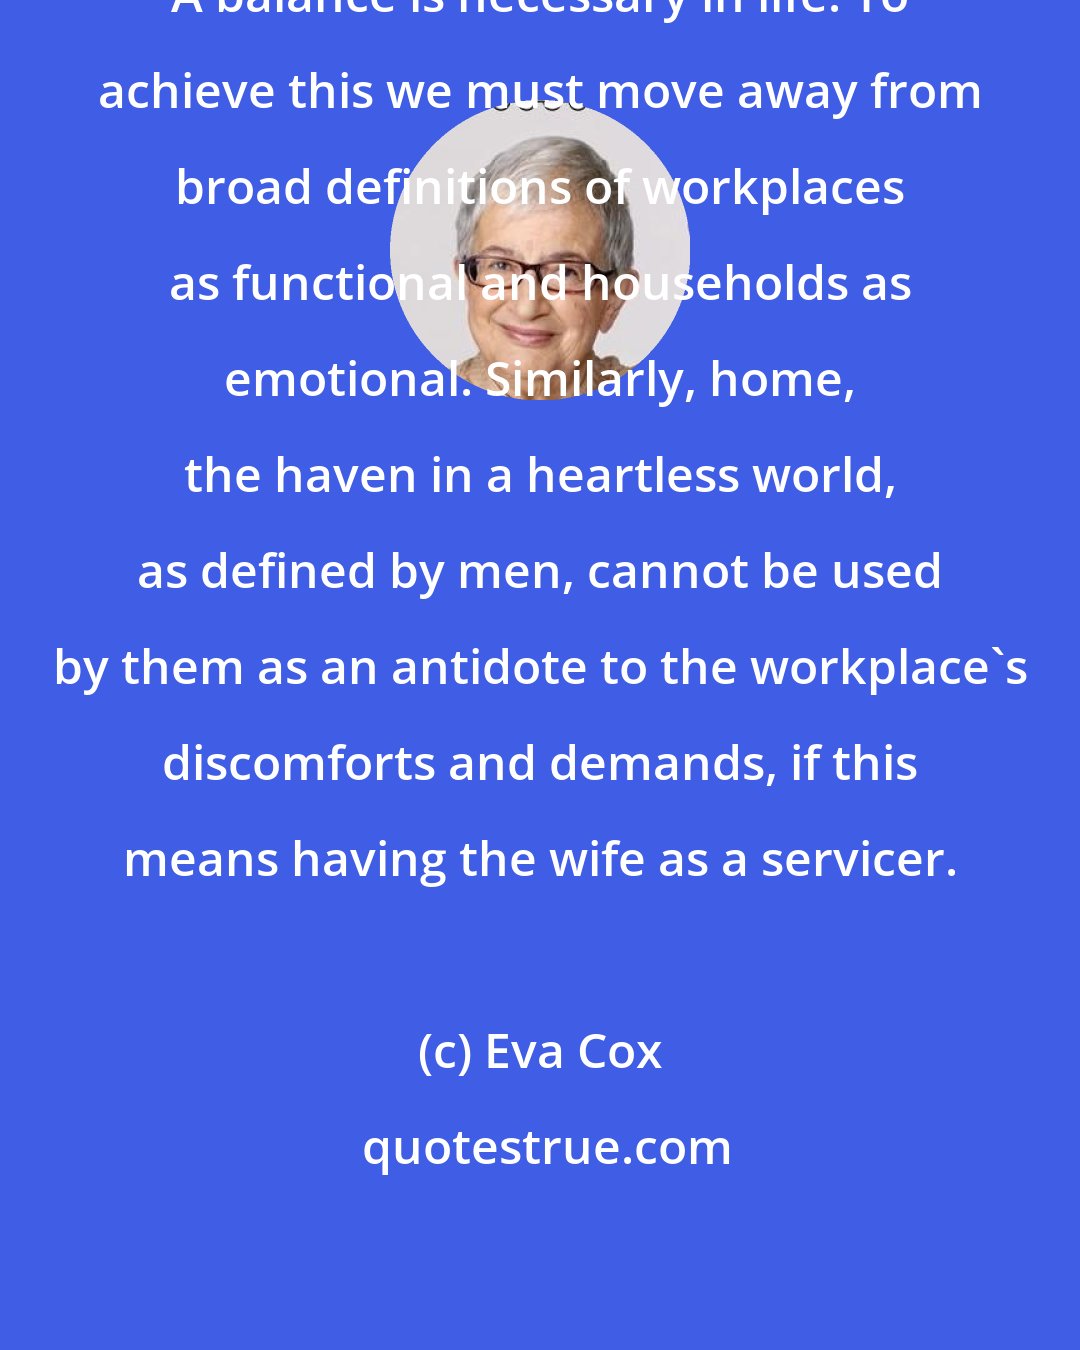 Eva Cox: A balance is necessary in life. To achieve this we must move away from broad definitions of workplaces as functional and households as emotional. Similarly, home, the haven in a heartless world, as defined by men, cannot be used by them as an antidote to the workplace's discomforts and demands, if this means having the wife as a servicer.